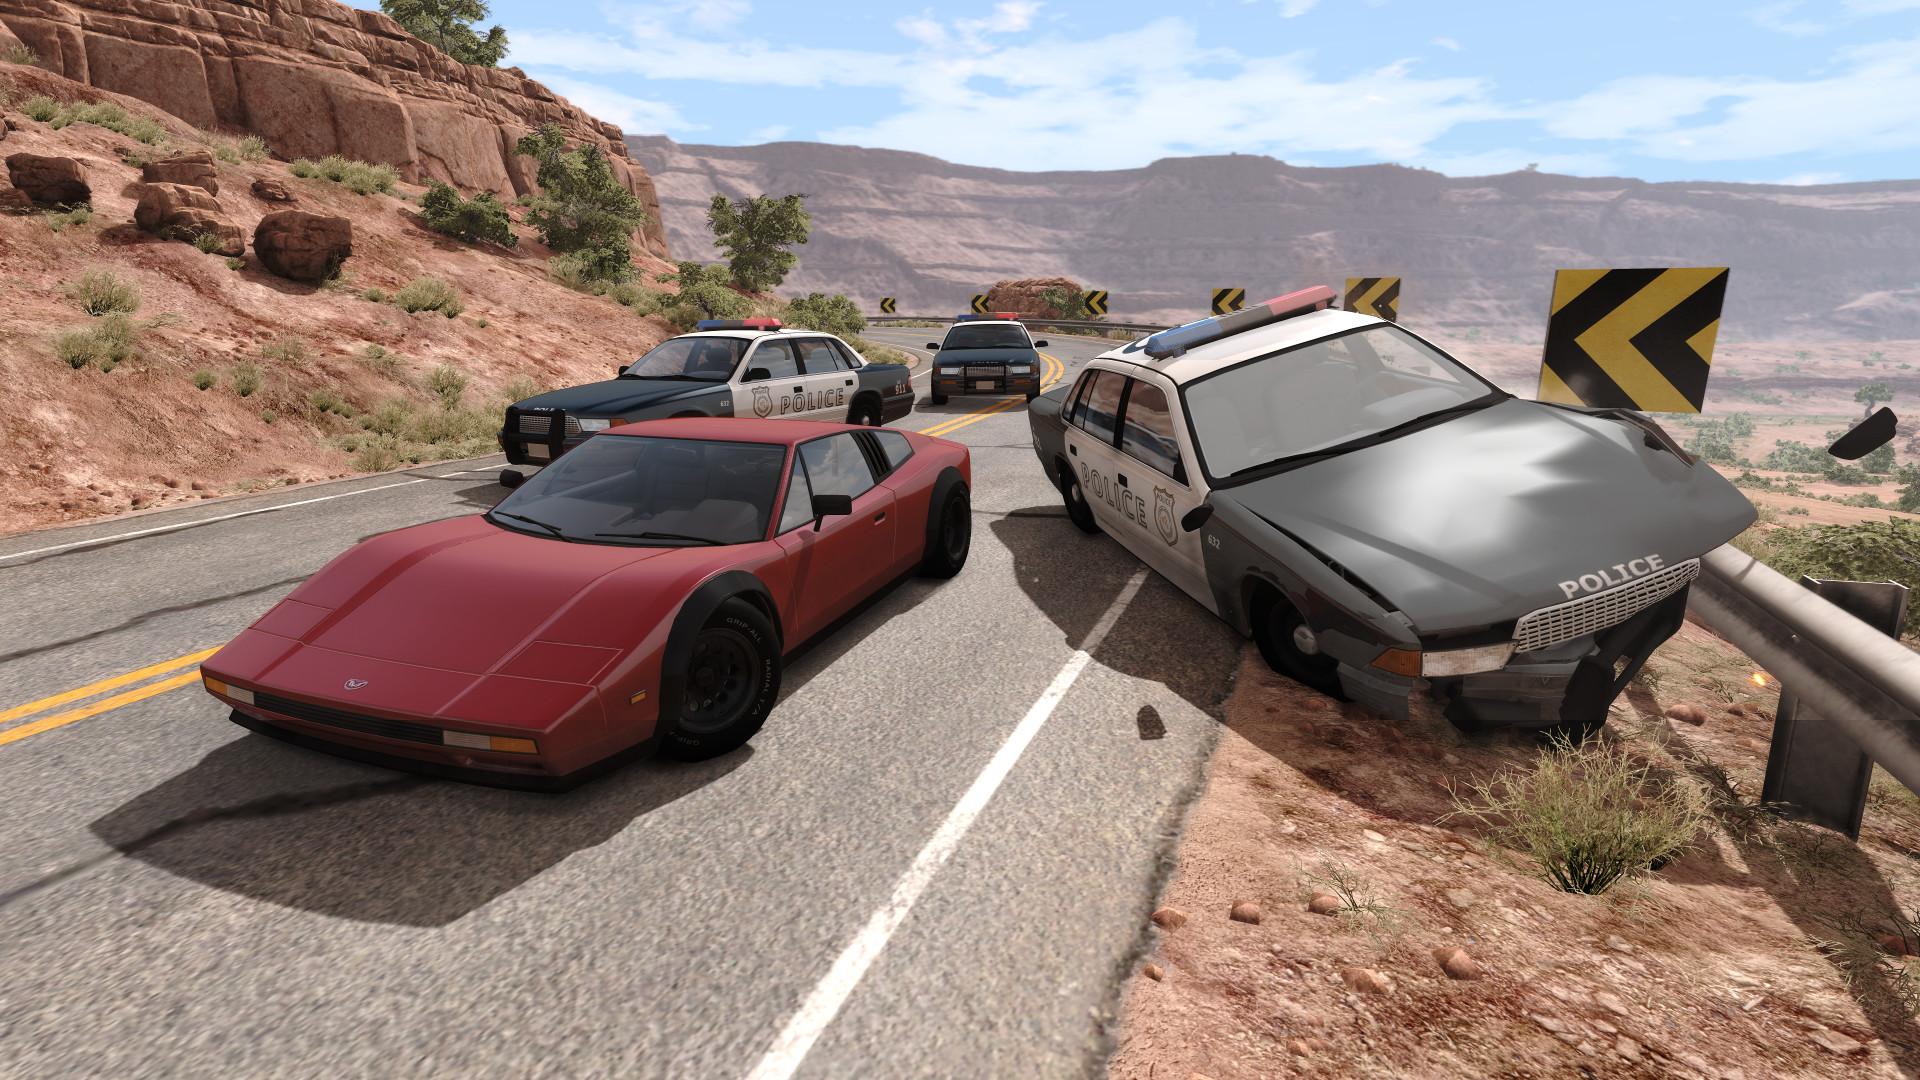 beamng drive online no download beamng drive game online